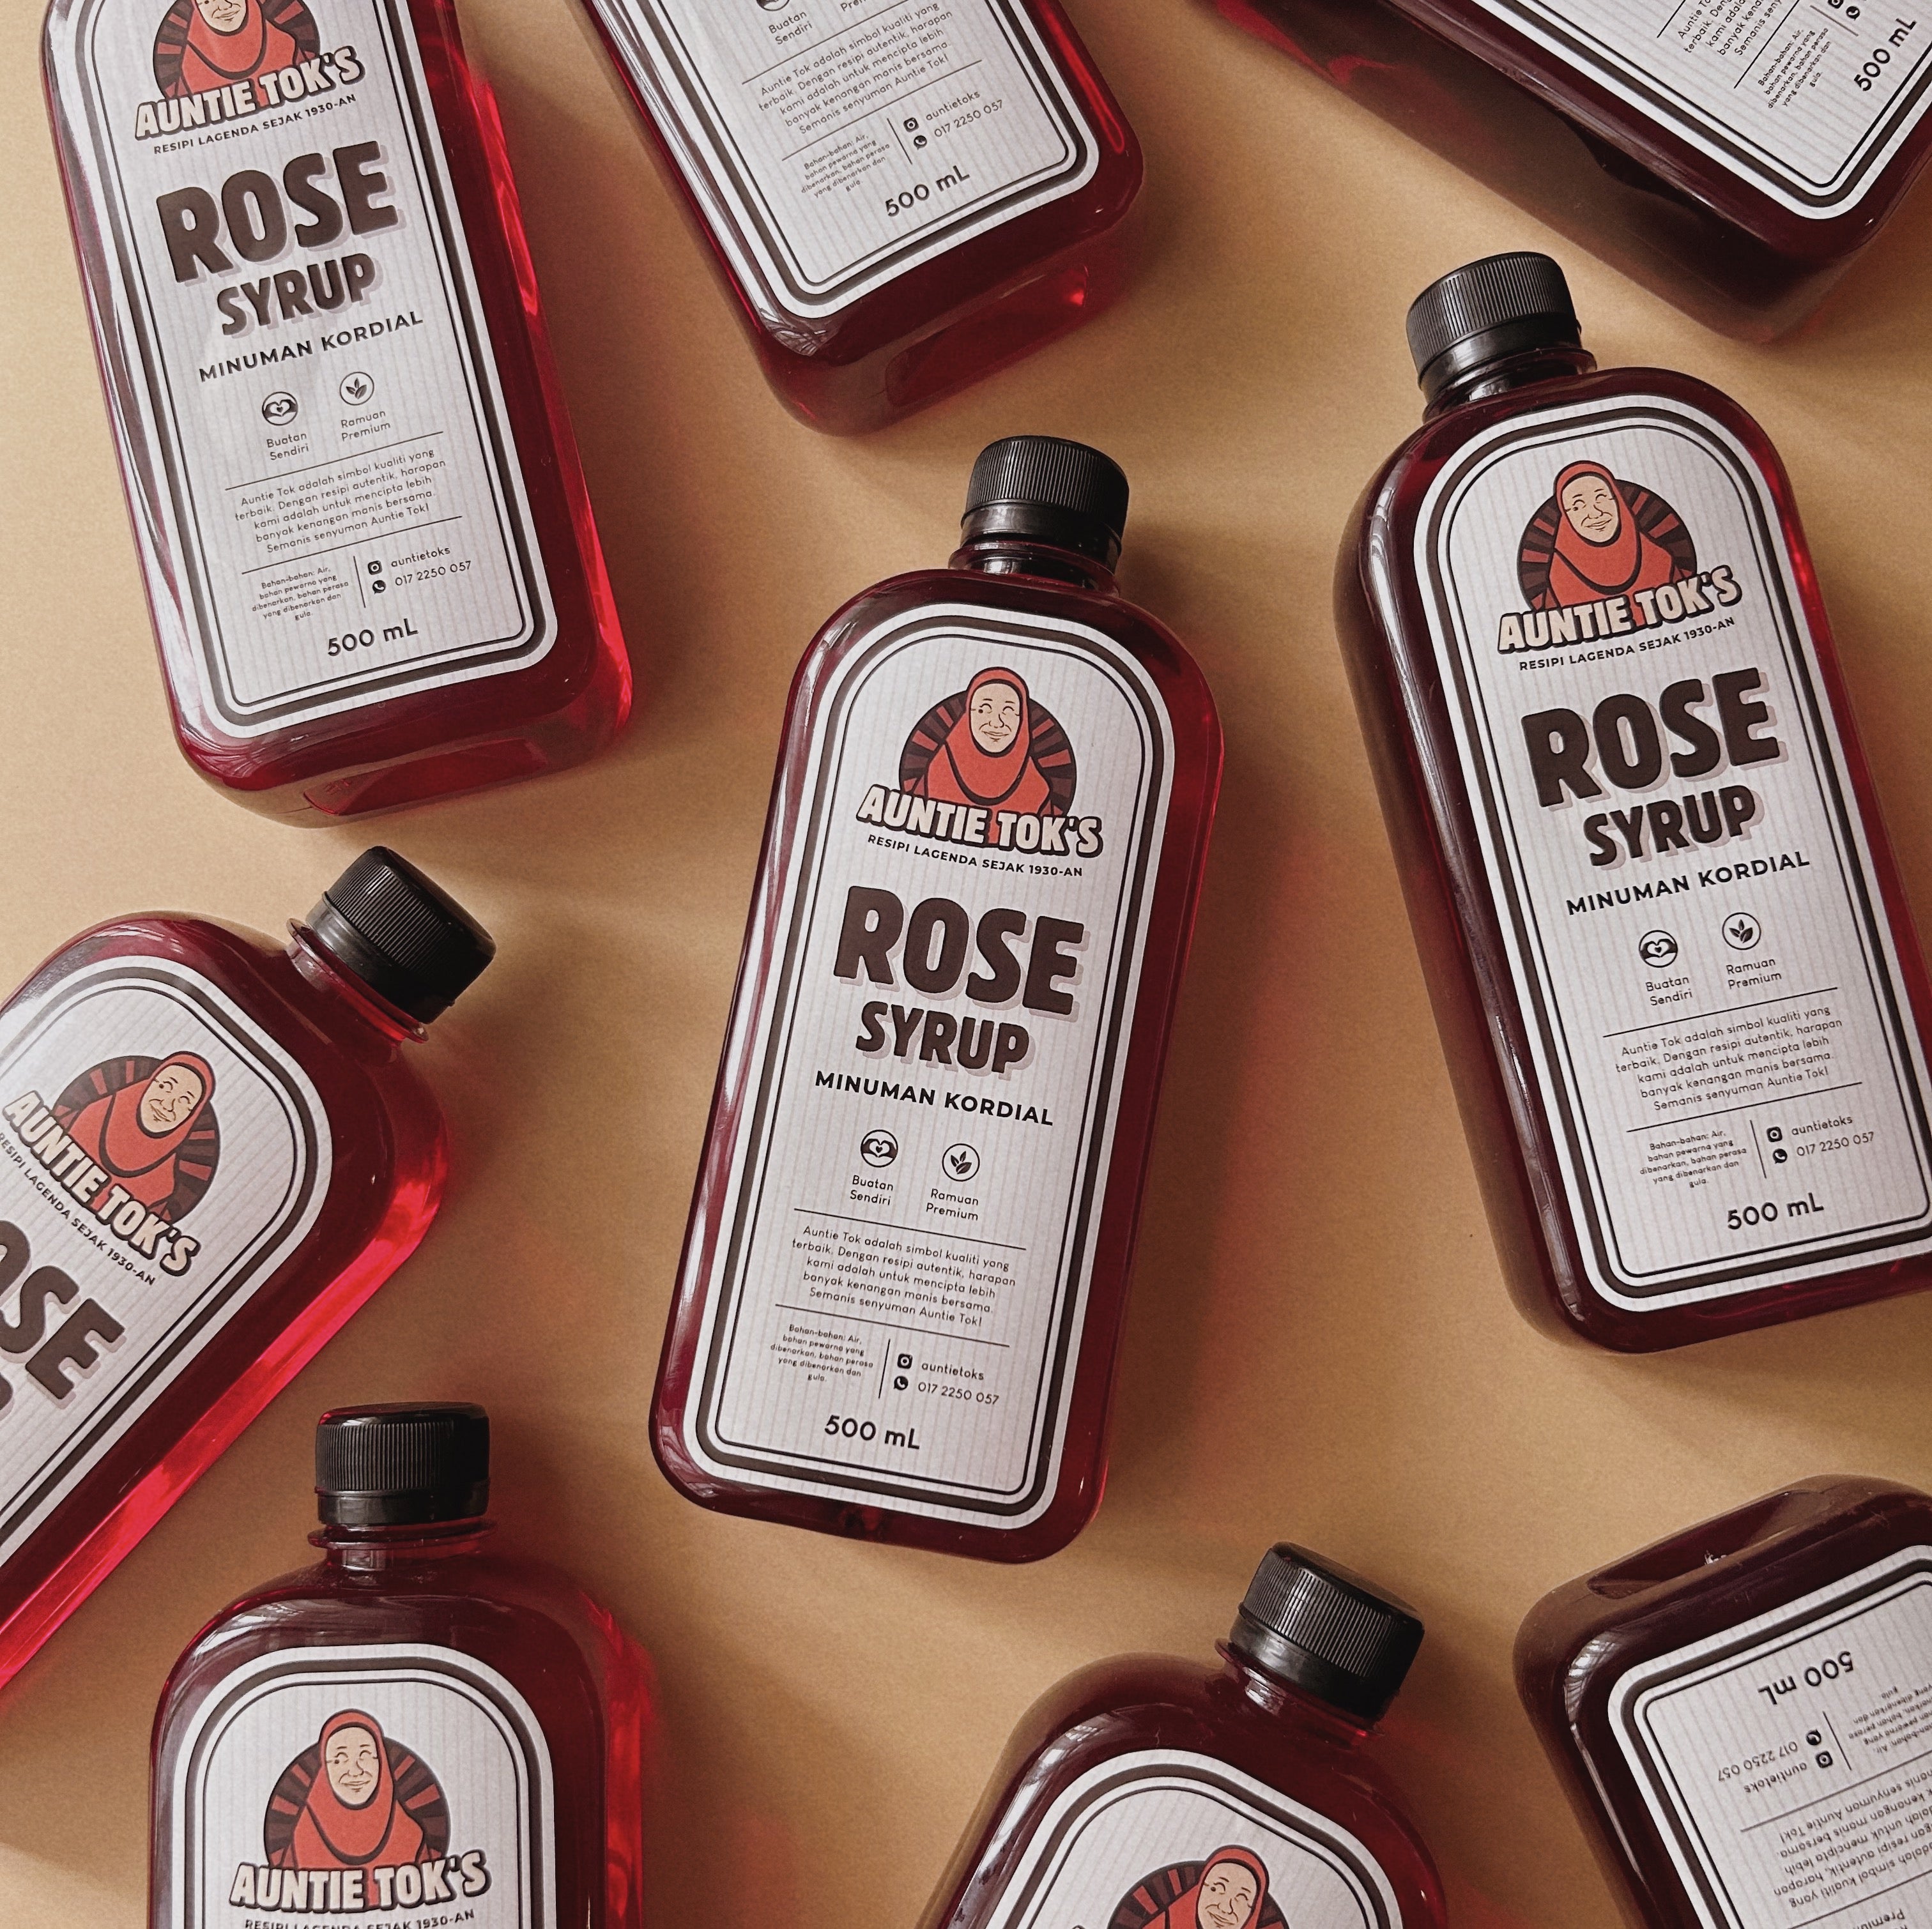 Auntie Tok's Rose Syrup